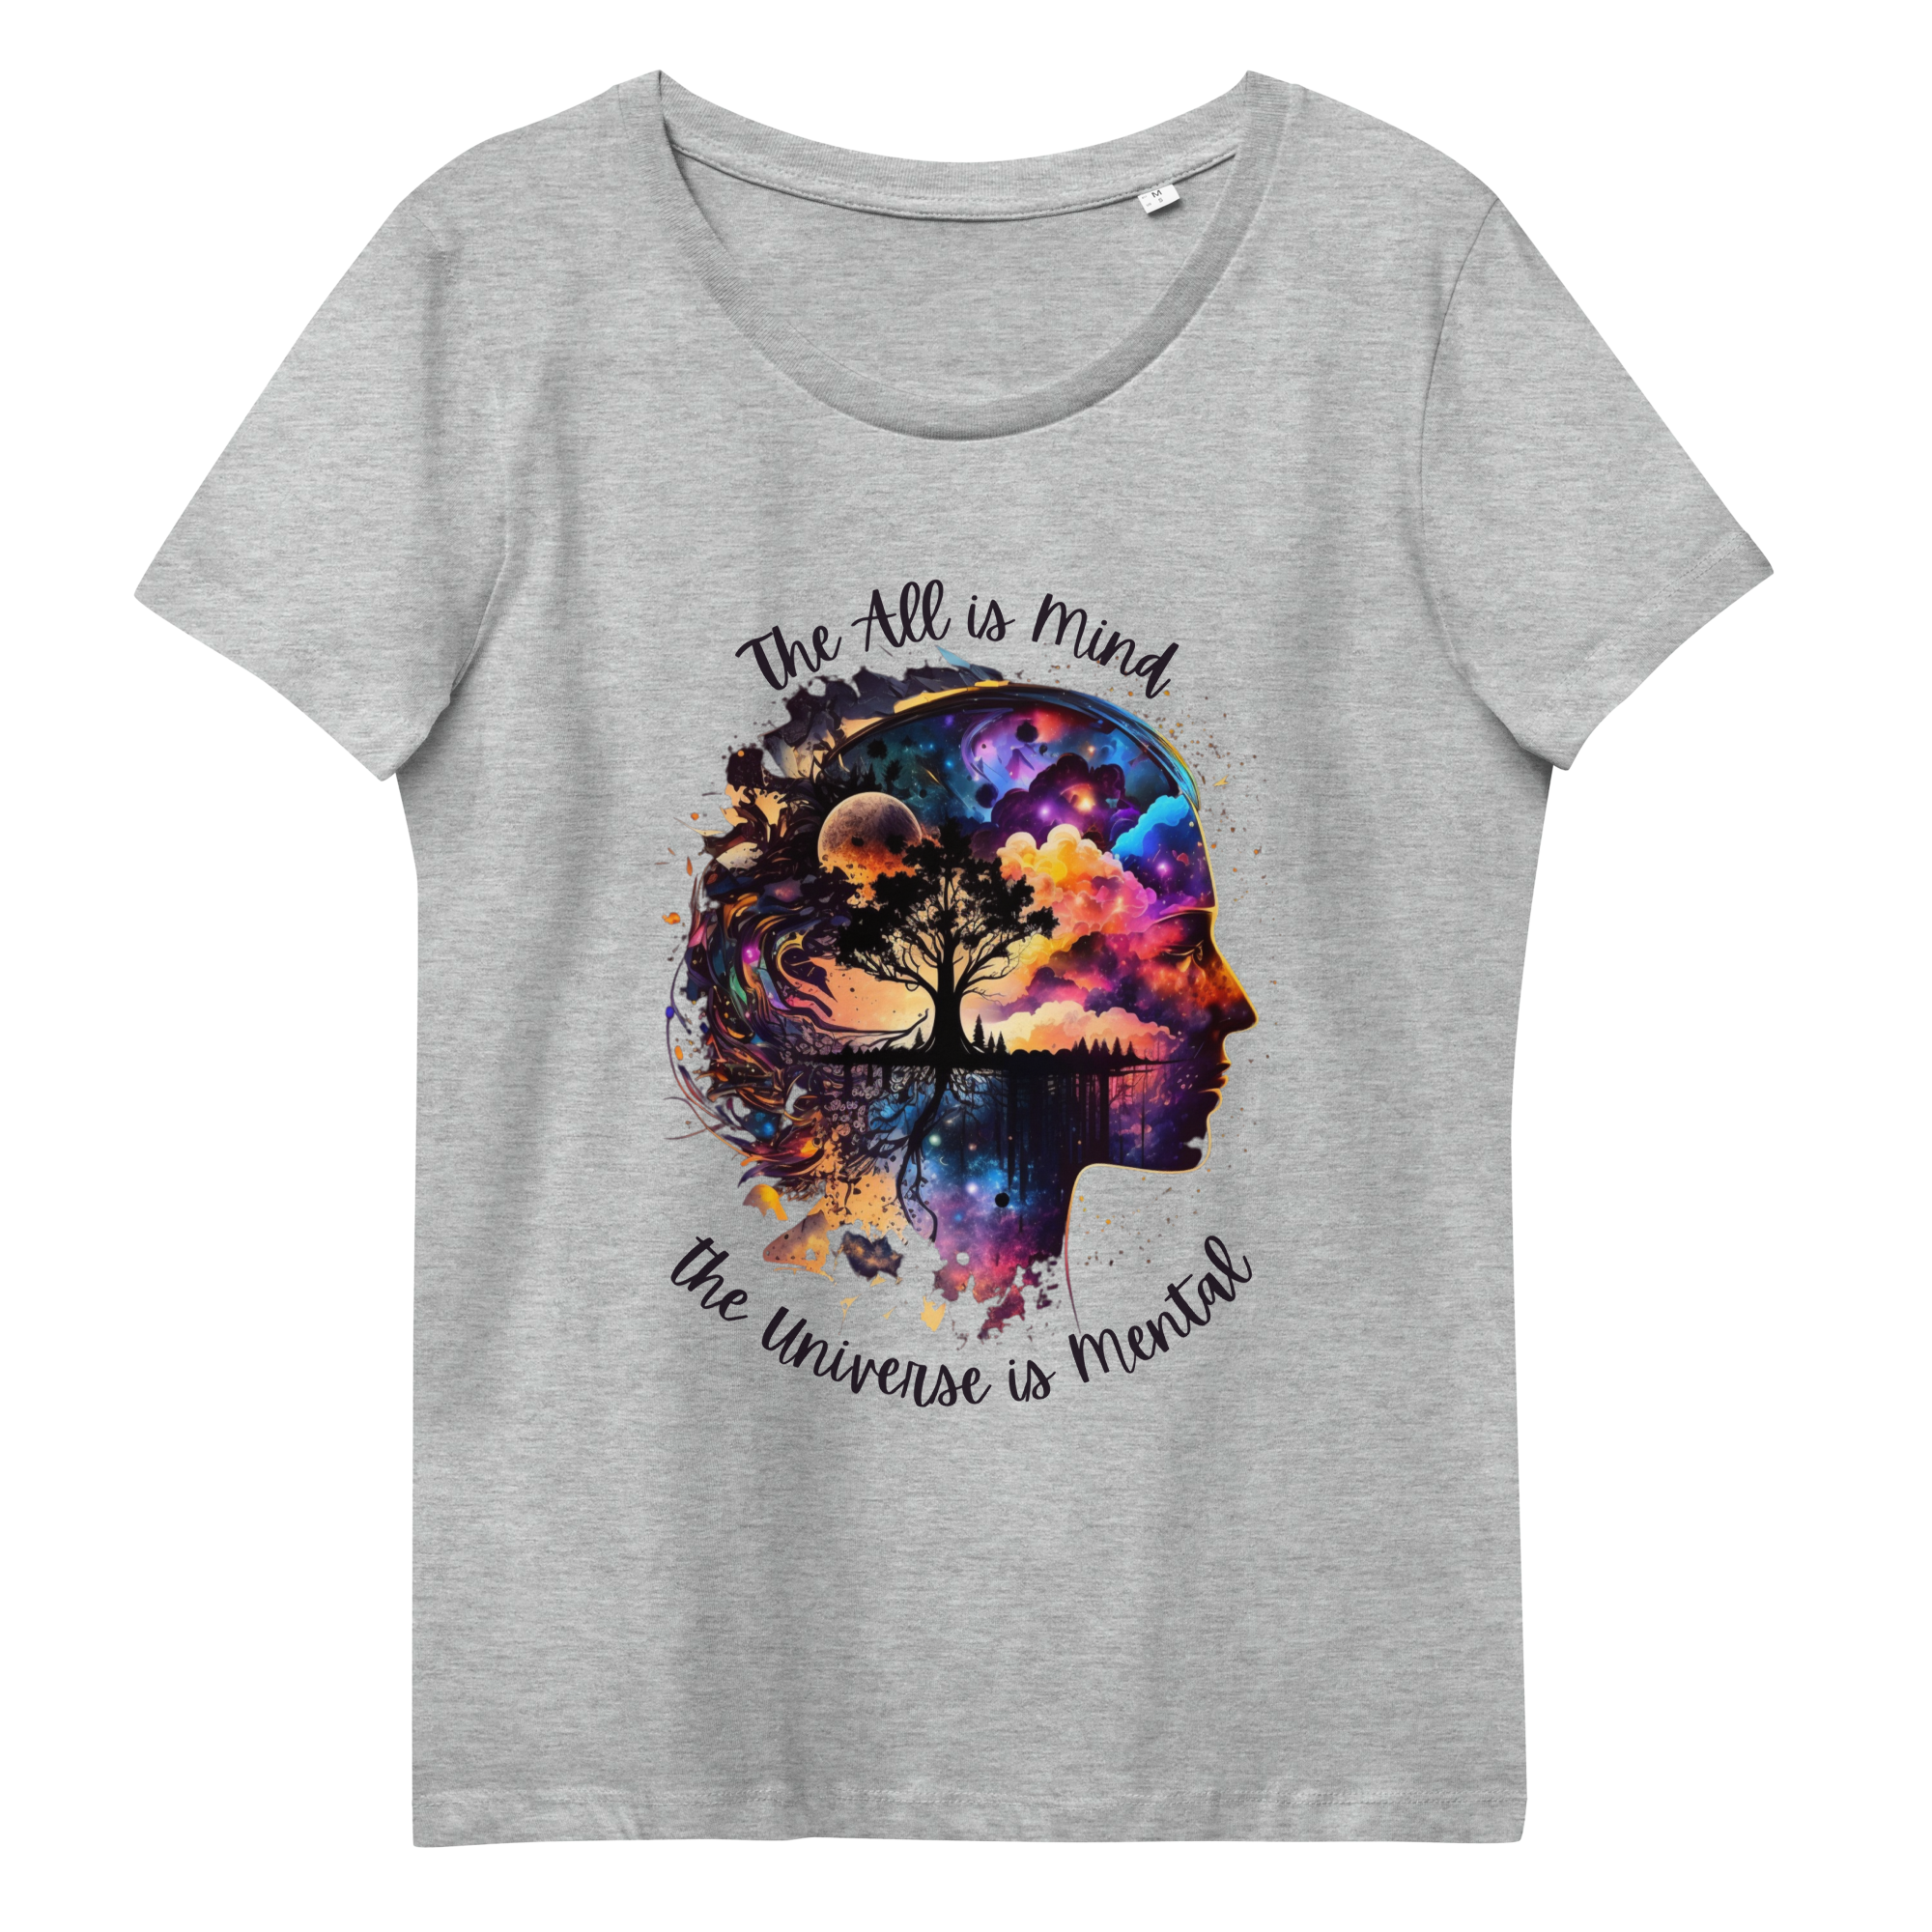 Hermetics "All is mind..." Women's fitted eco tee